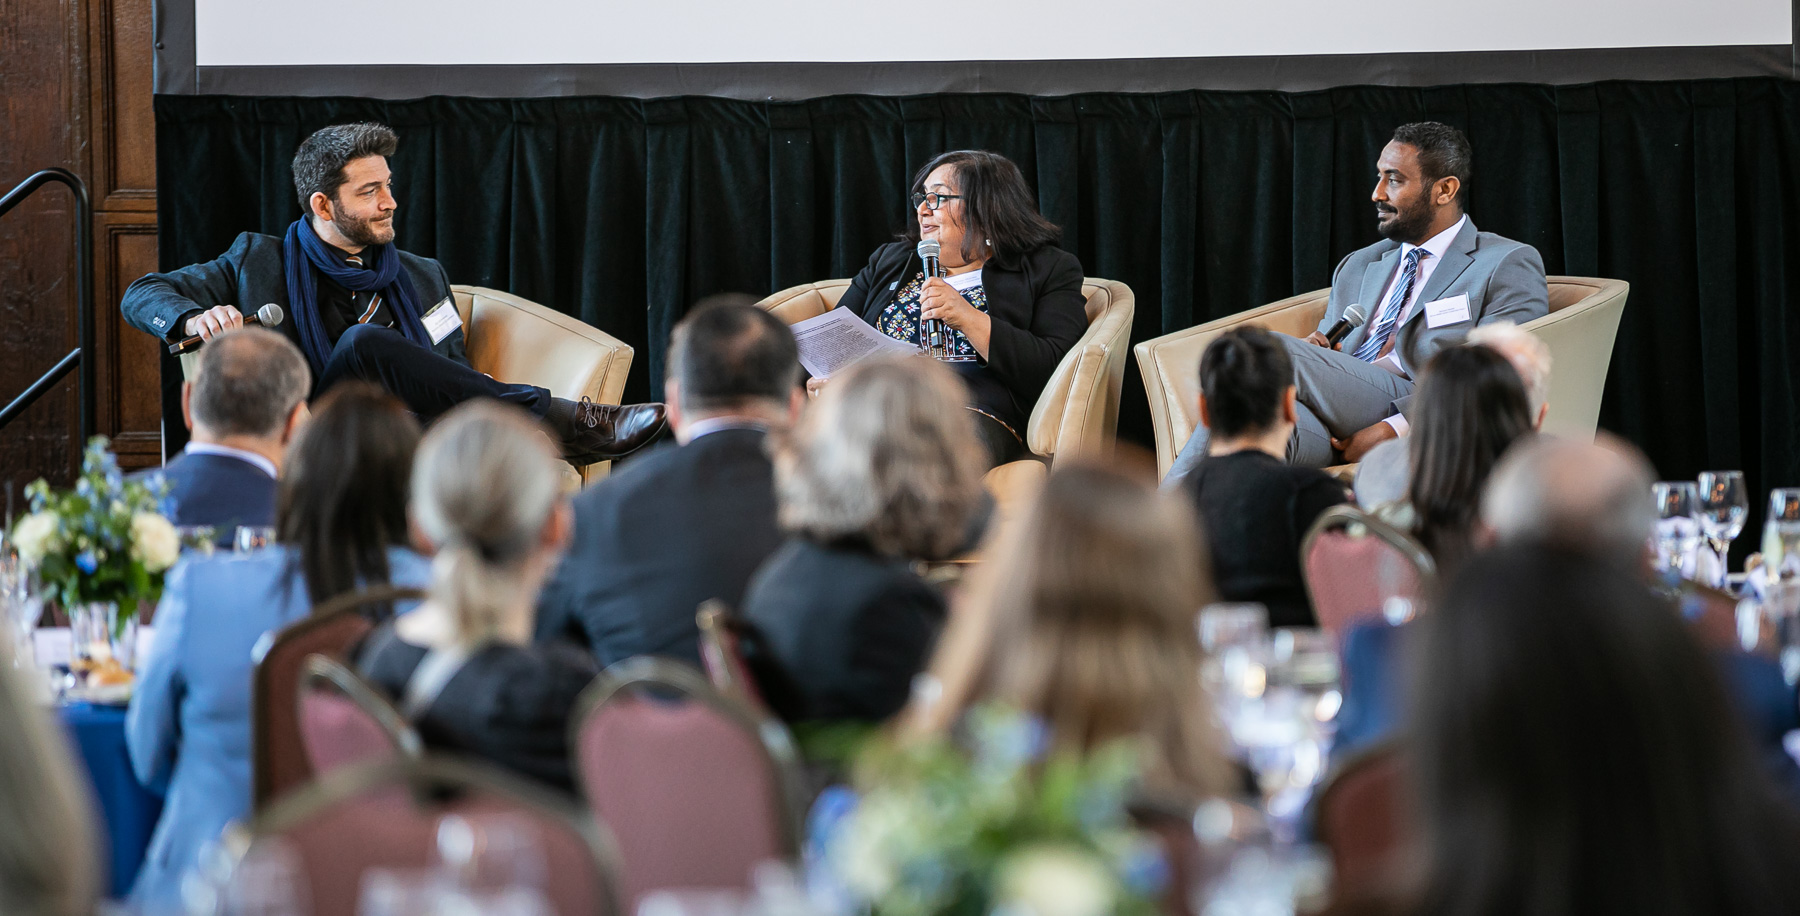 Ilja Sichrovsky, left, and Mohamed Abubakr, right, participate in a discussion moderated by Shailja Sharma, professor and chair of International Studies, Refugee and Forced Migration Studies, Global Asian Studies, and Islamic World Studies.